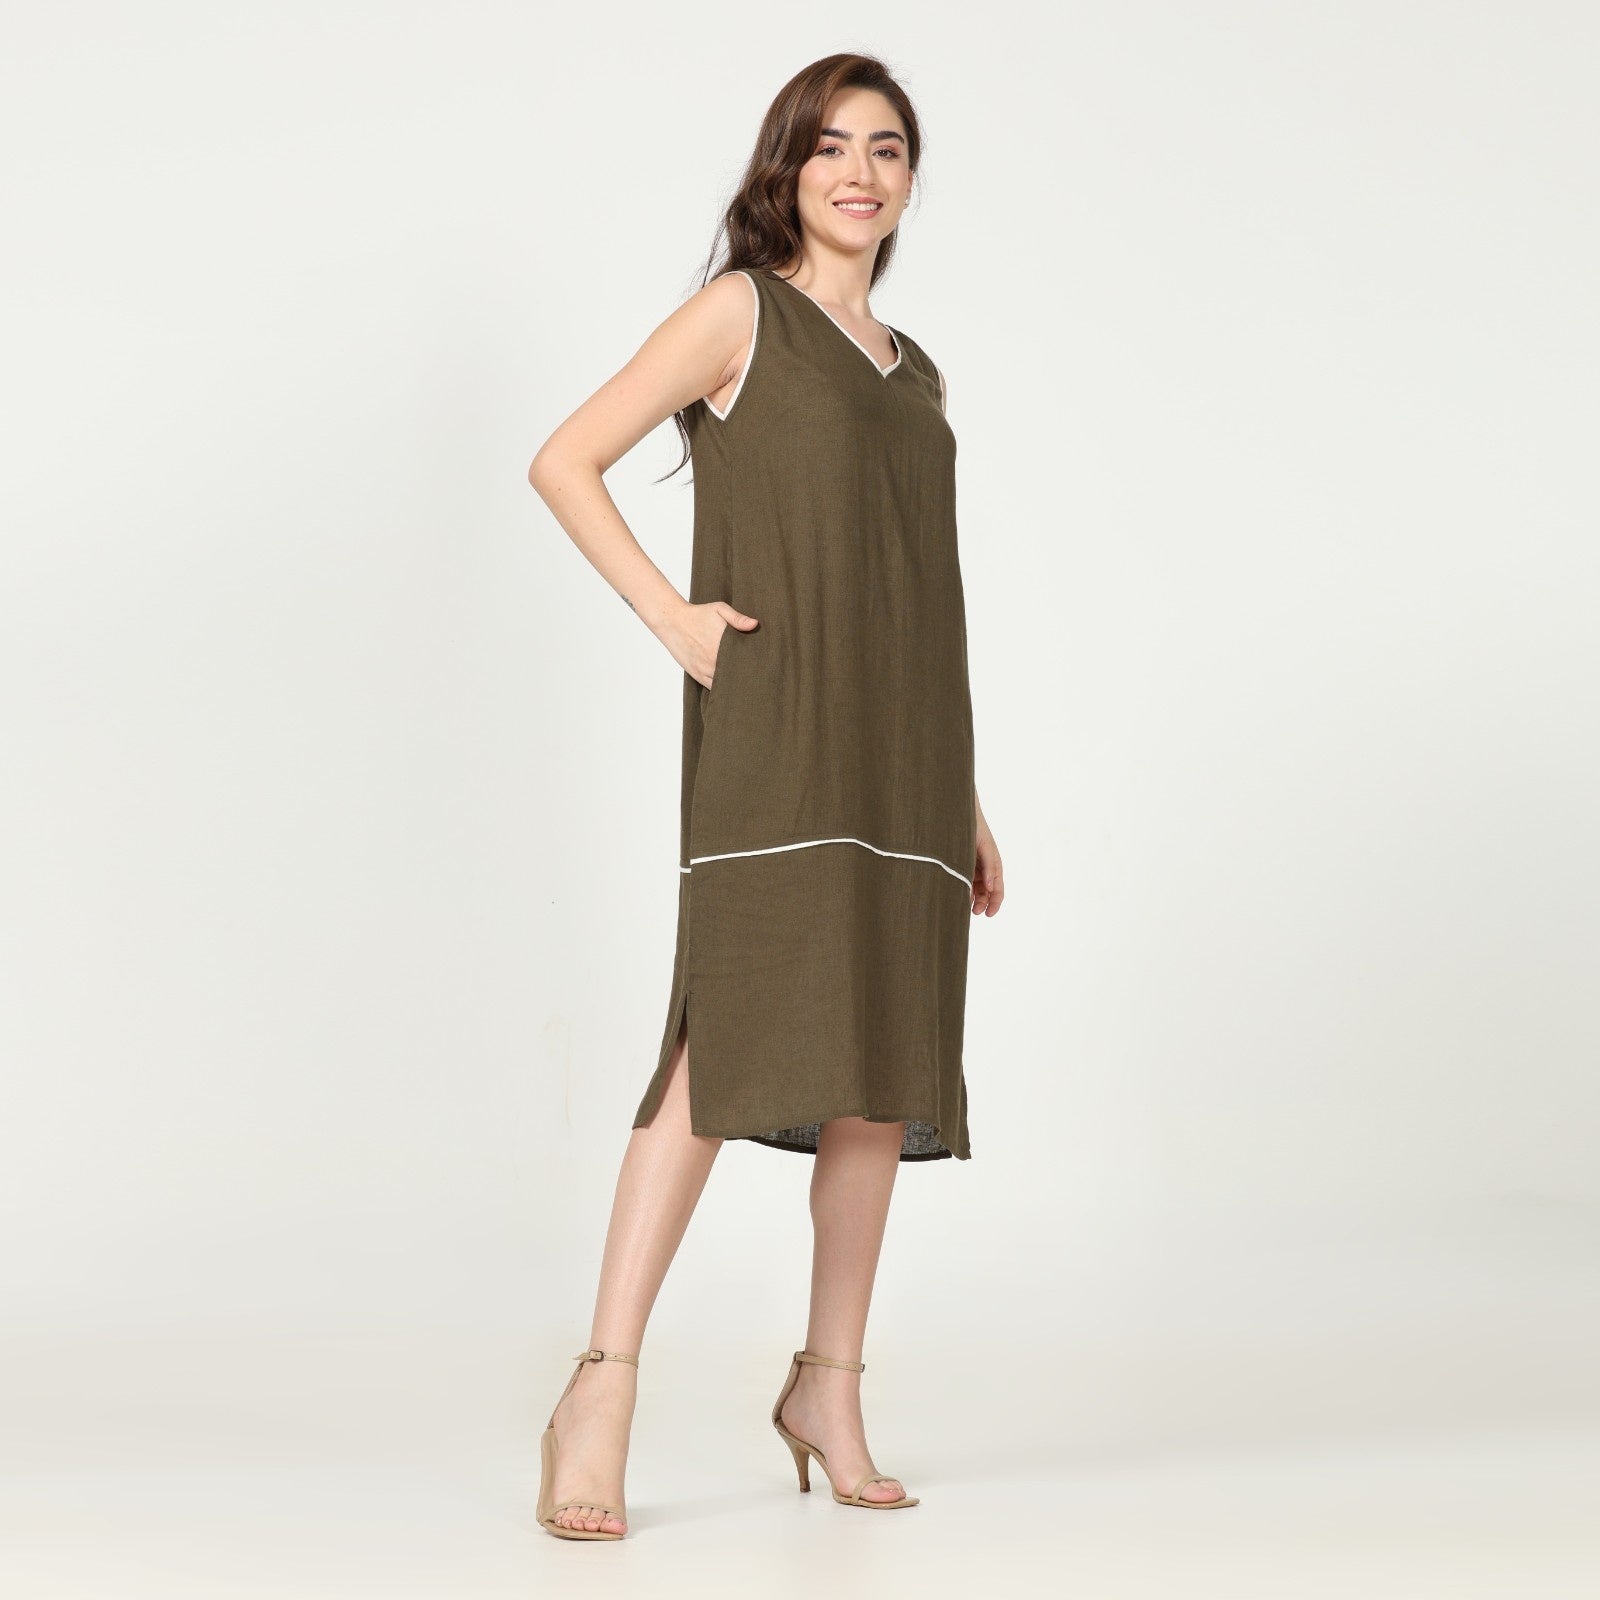 Jackie Dress - Olive Green With Ecru Edging - Limited Edition